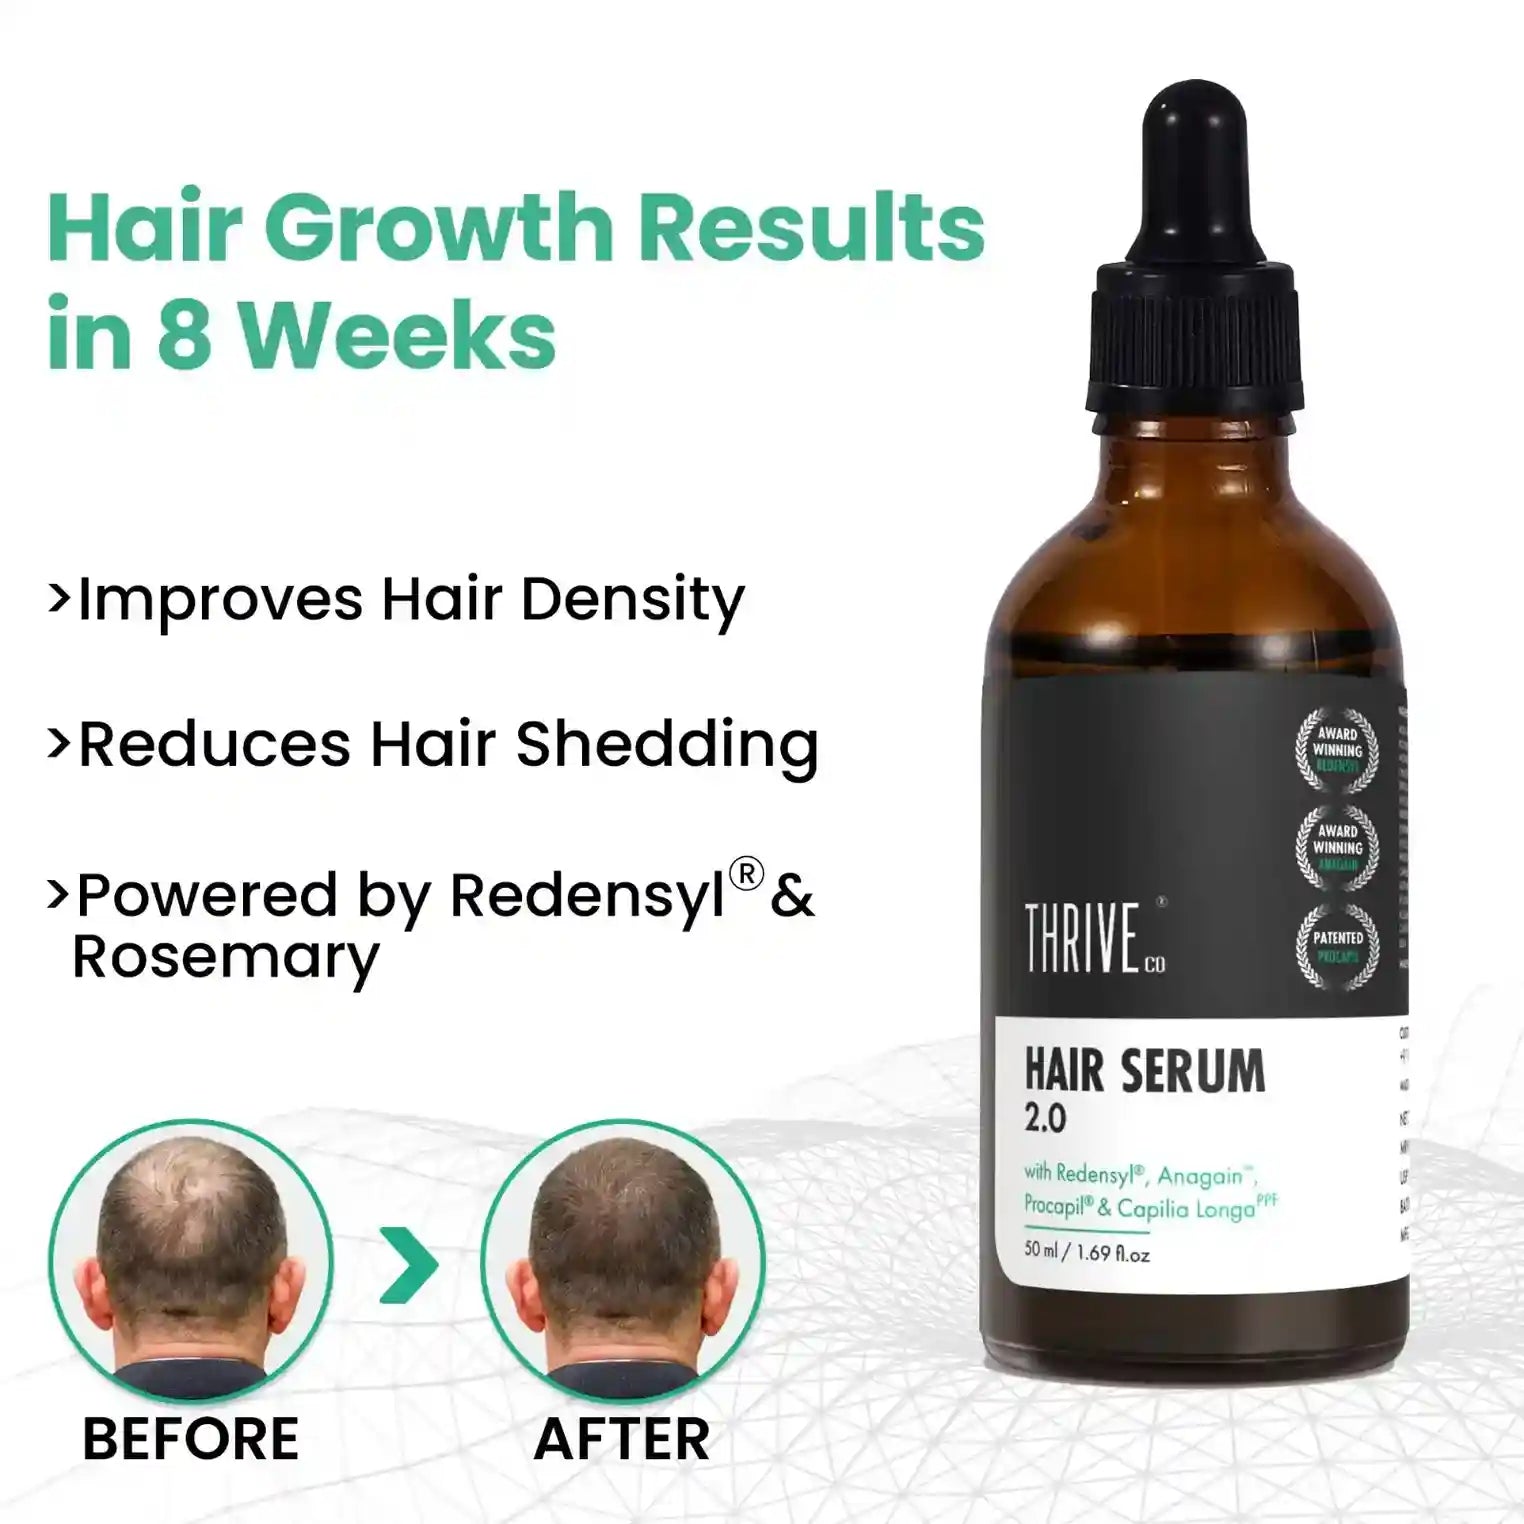 hair growth serum with redensyl anagain procapil for hairfall control